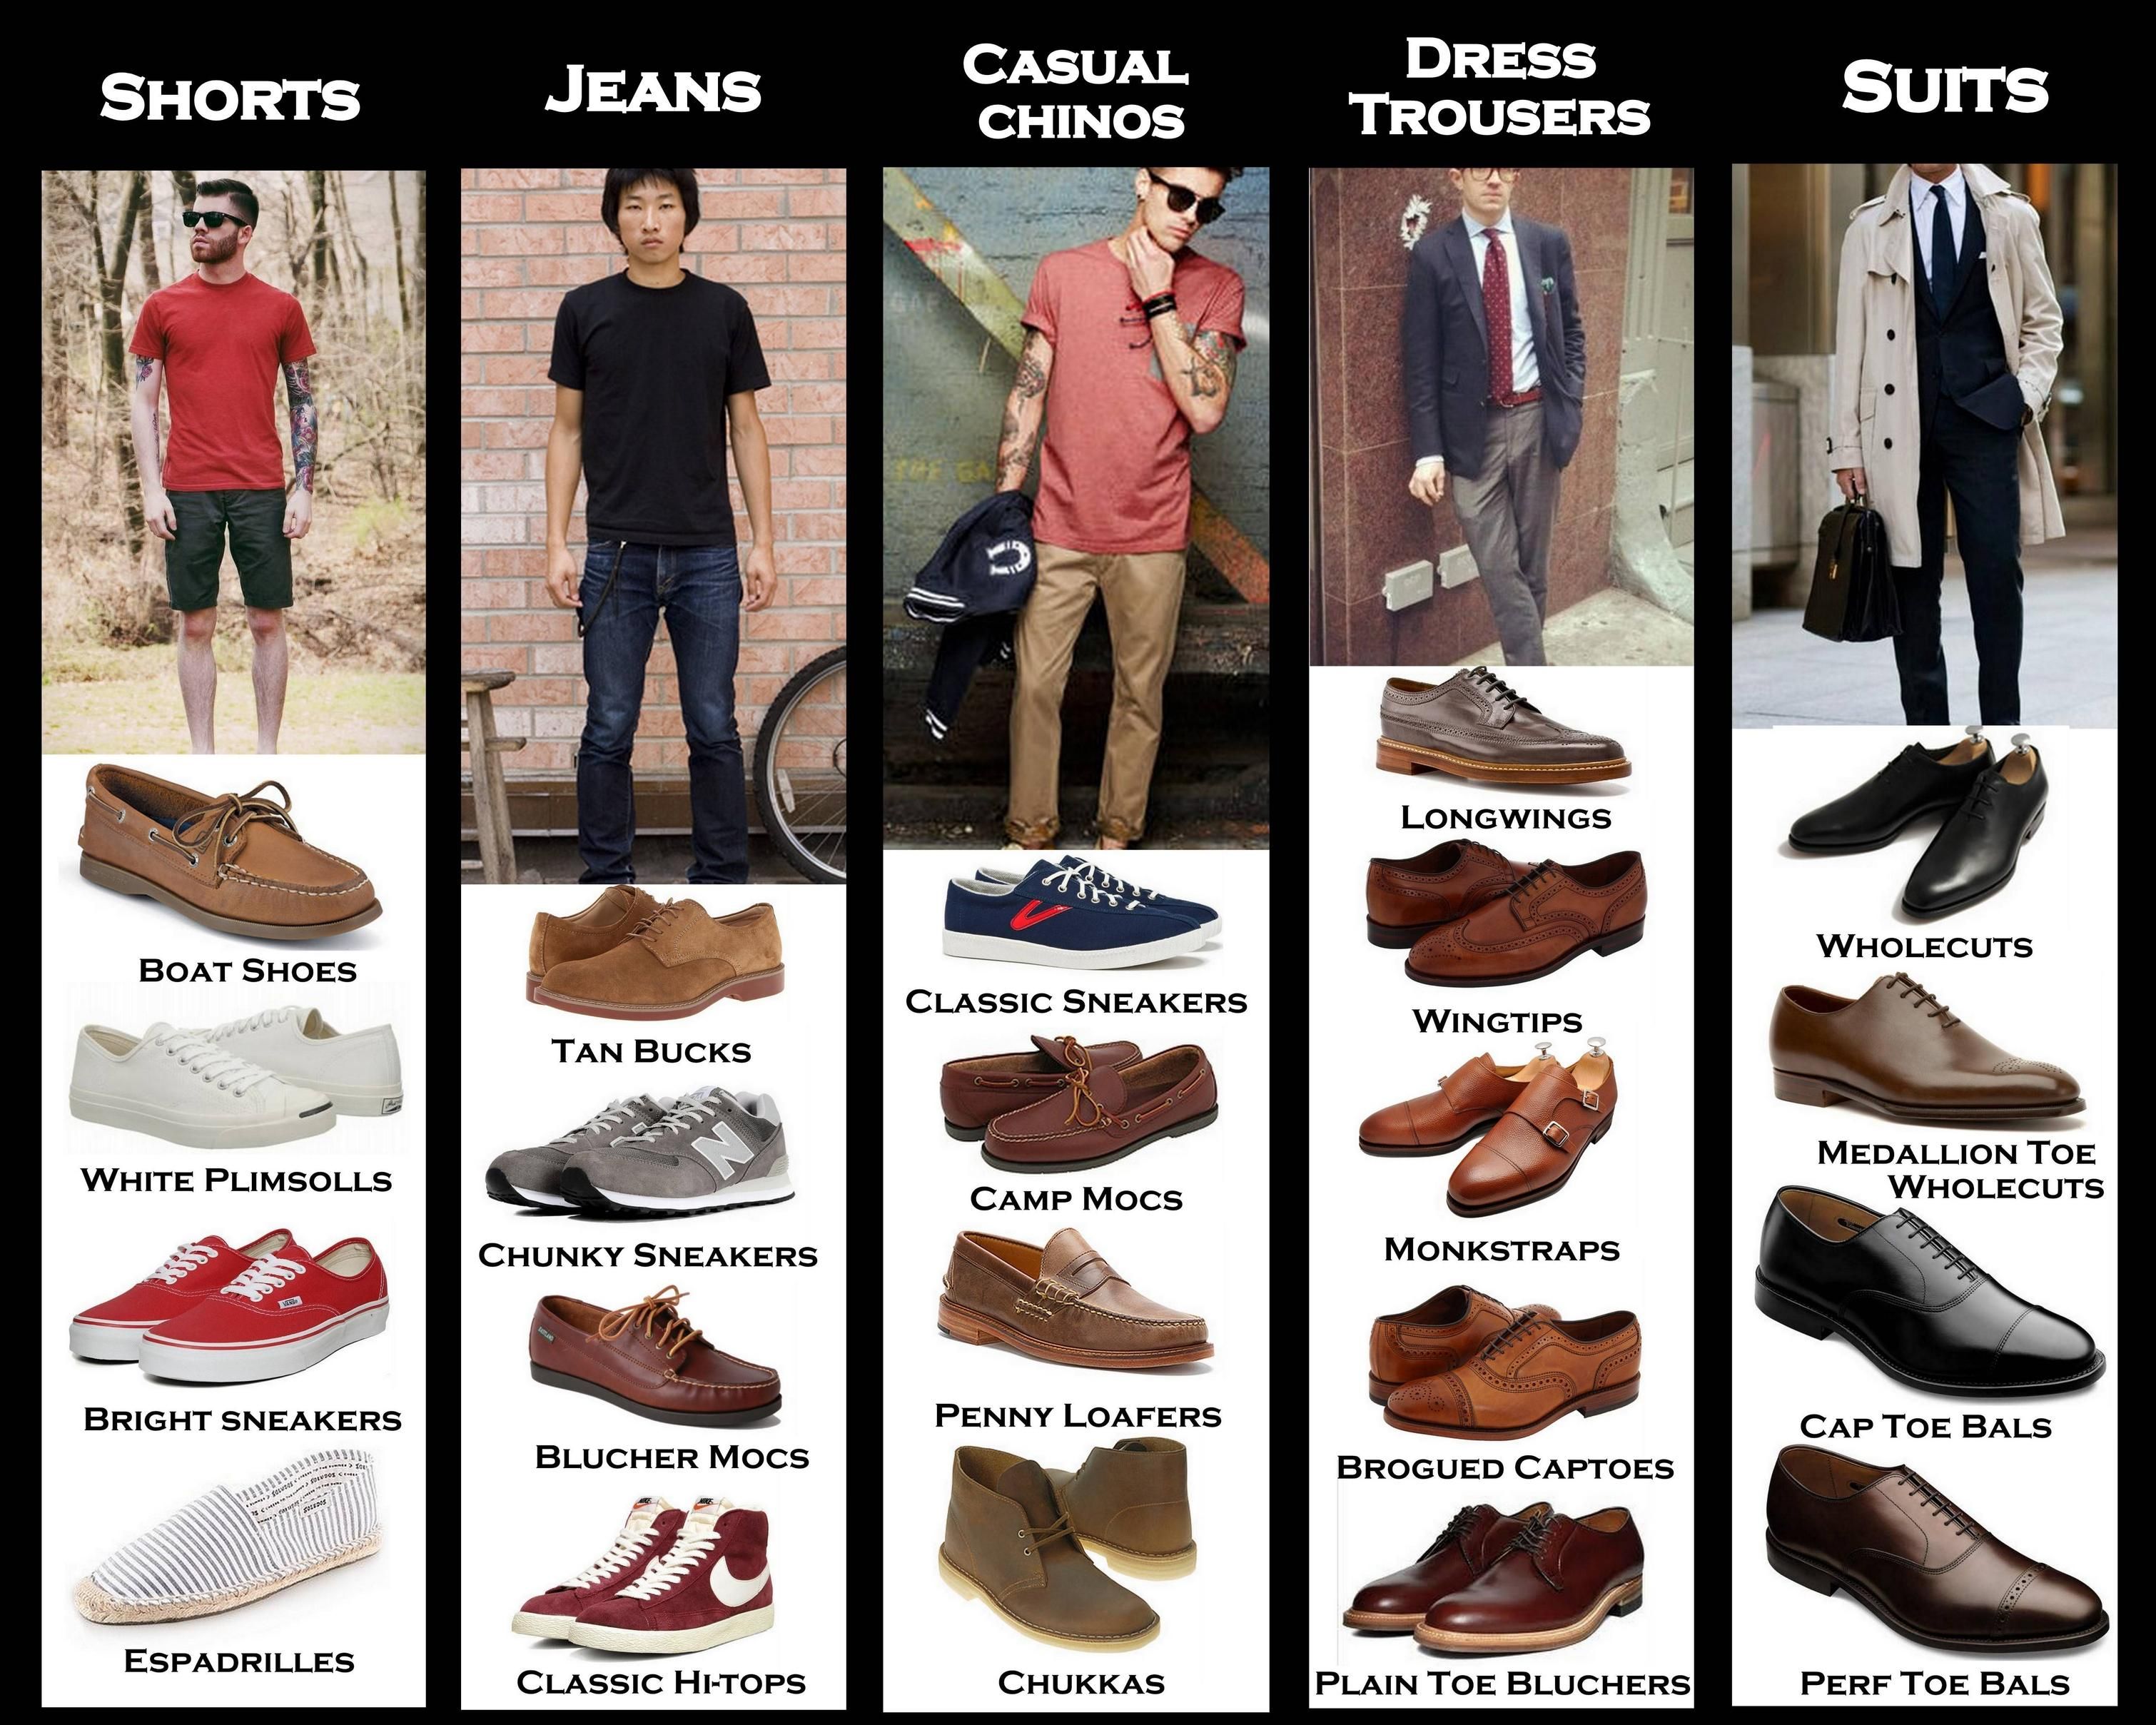 I made a visual beginner's guide to choosing appropriate shoes ...